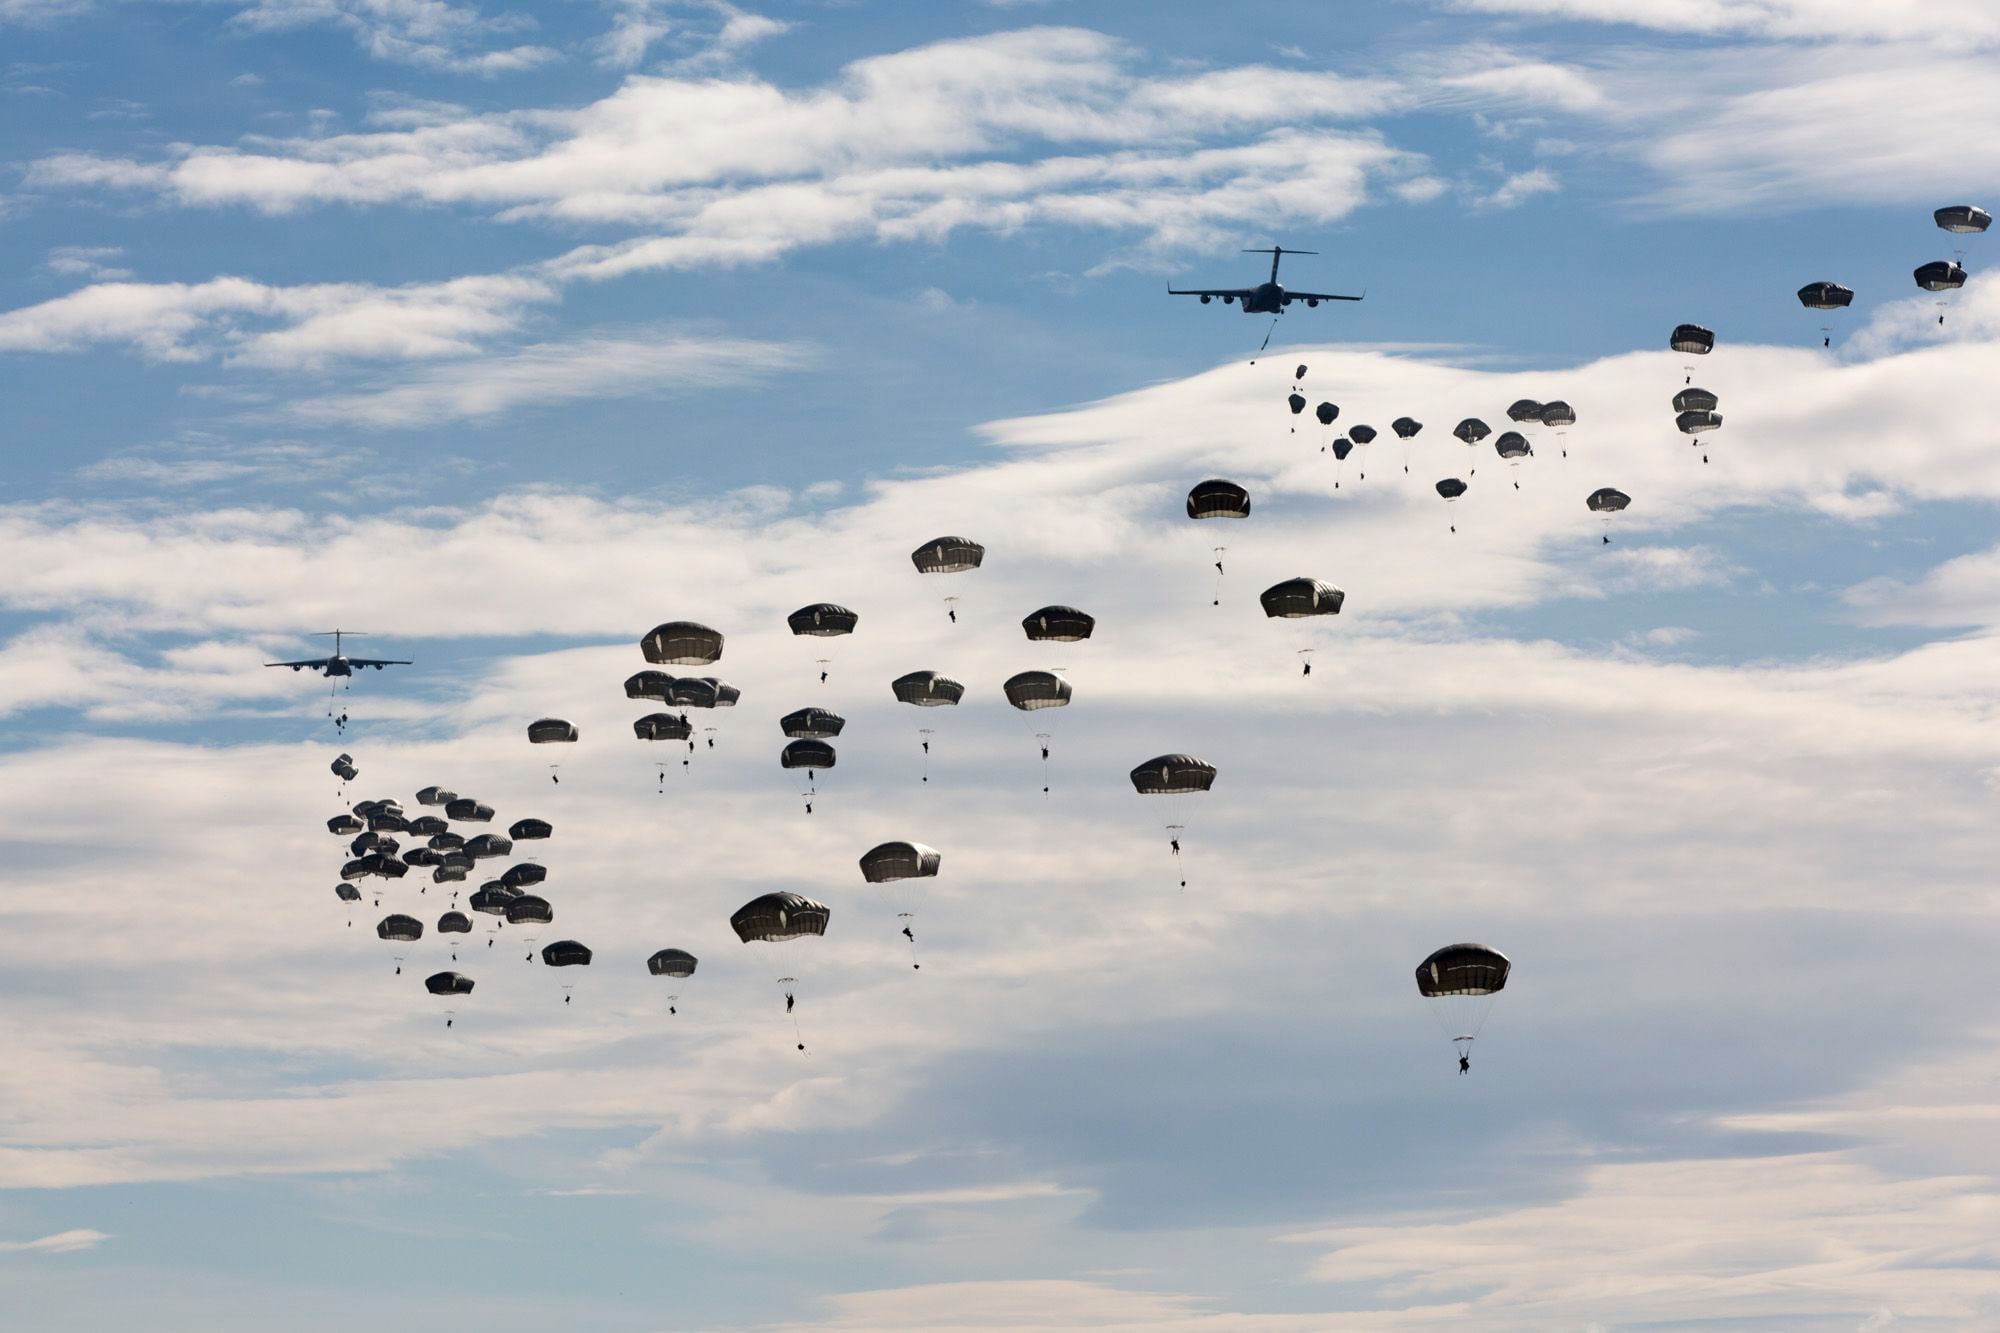 Image of WWII: PARATROOPERS. - American Paratroopers Before A Jump